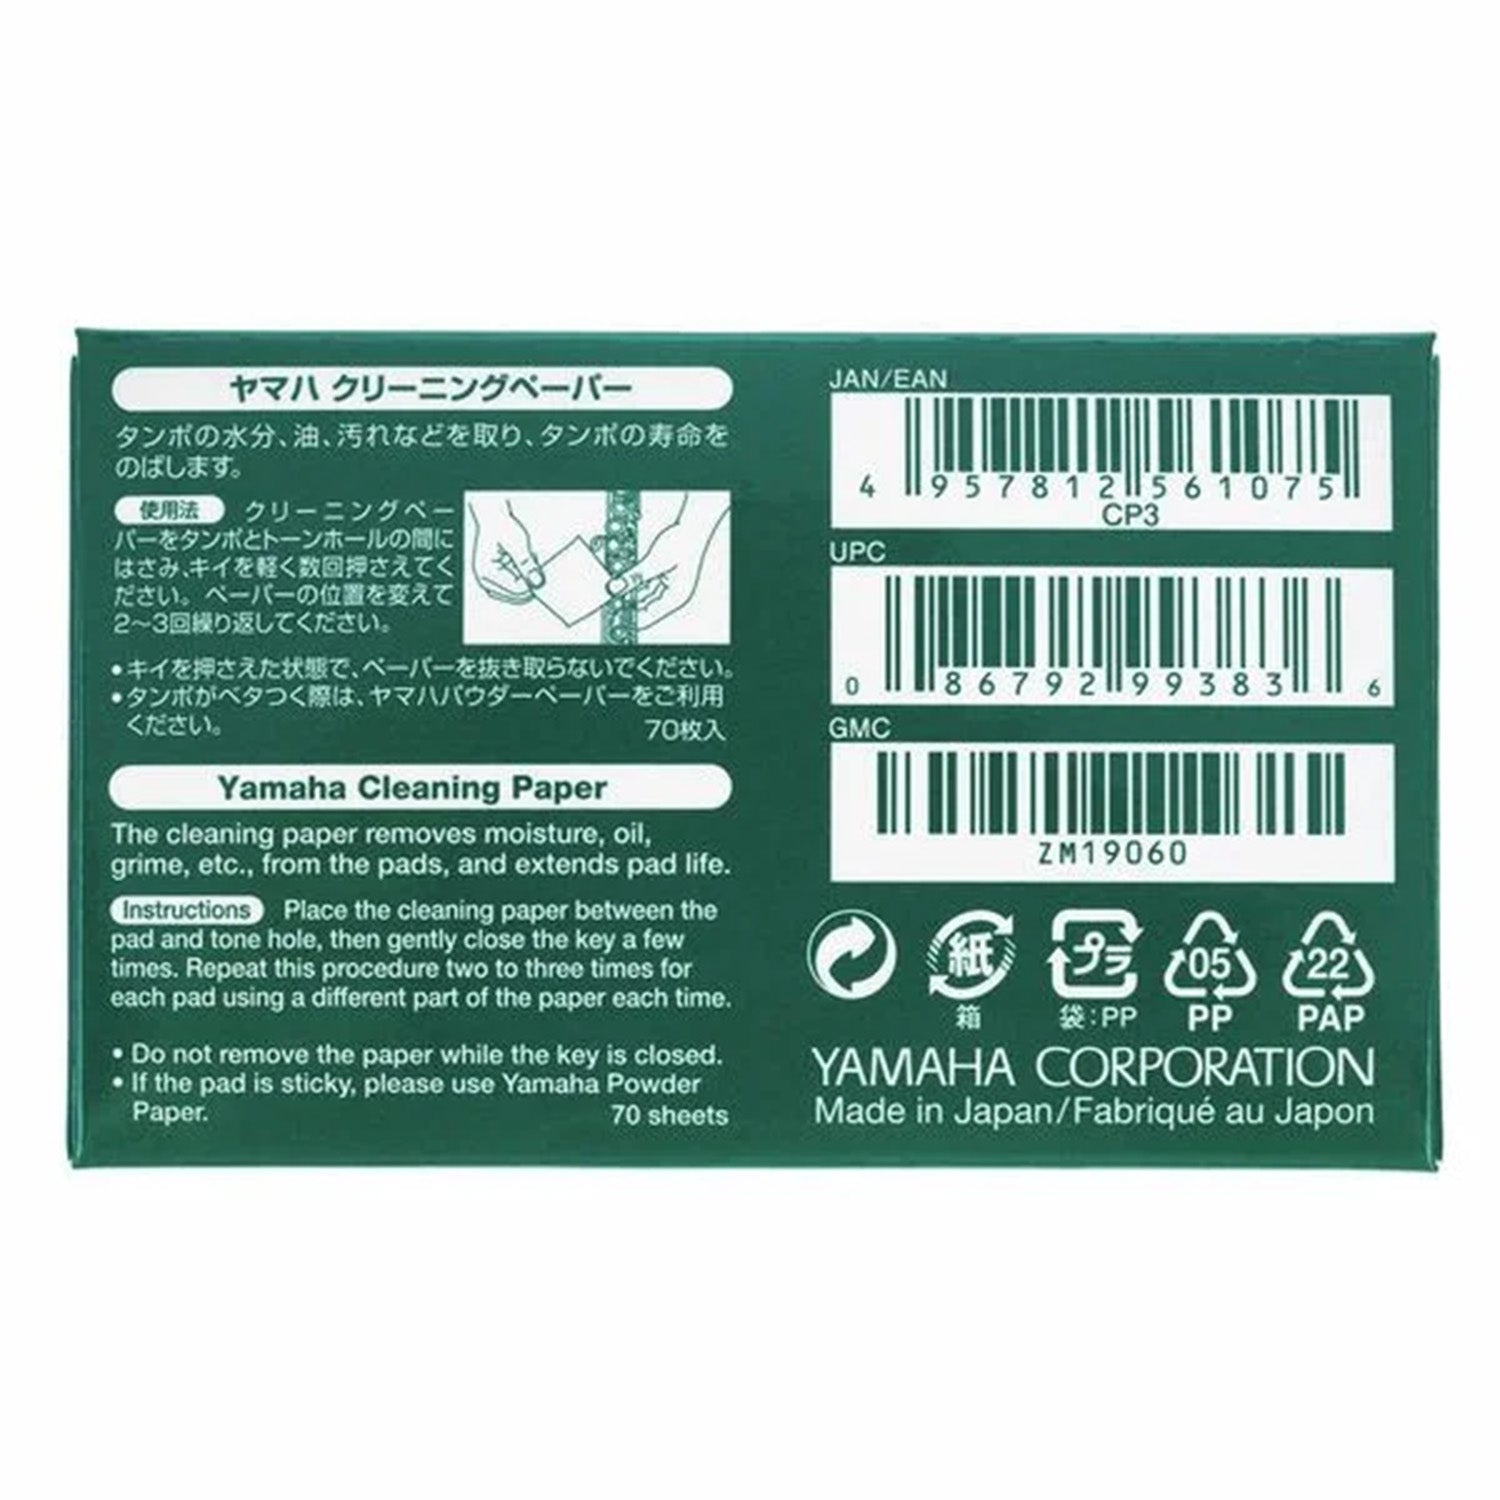 rear view of box of Yamaha pad cleaning papers, with writing in japanese and English, with barcodes and recycling logos